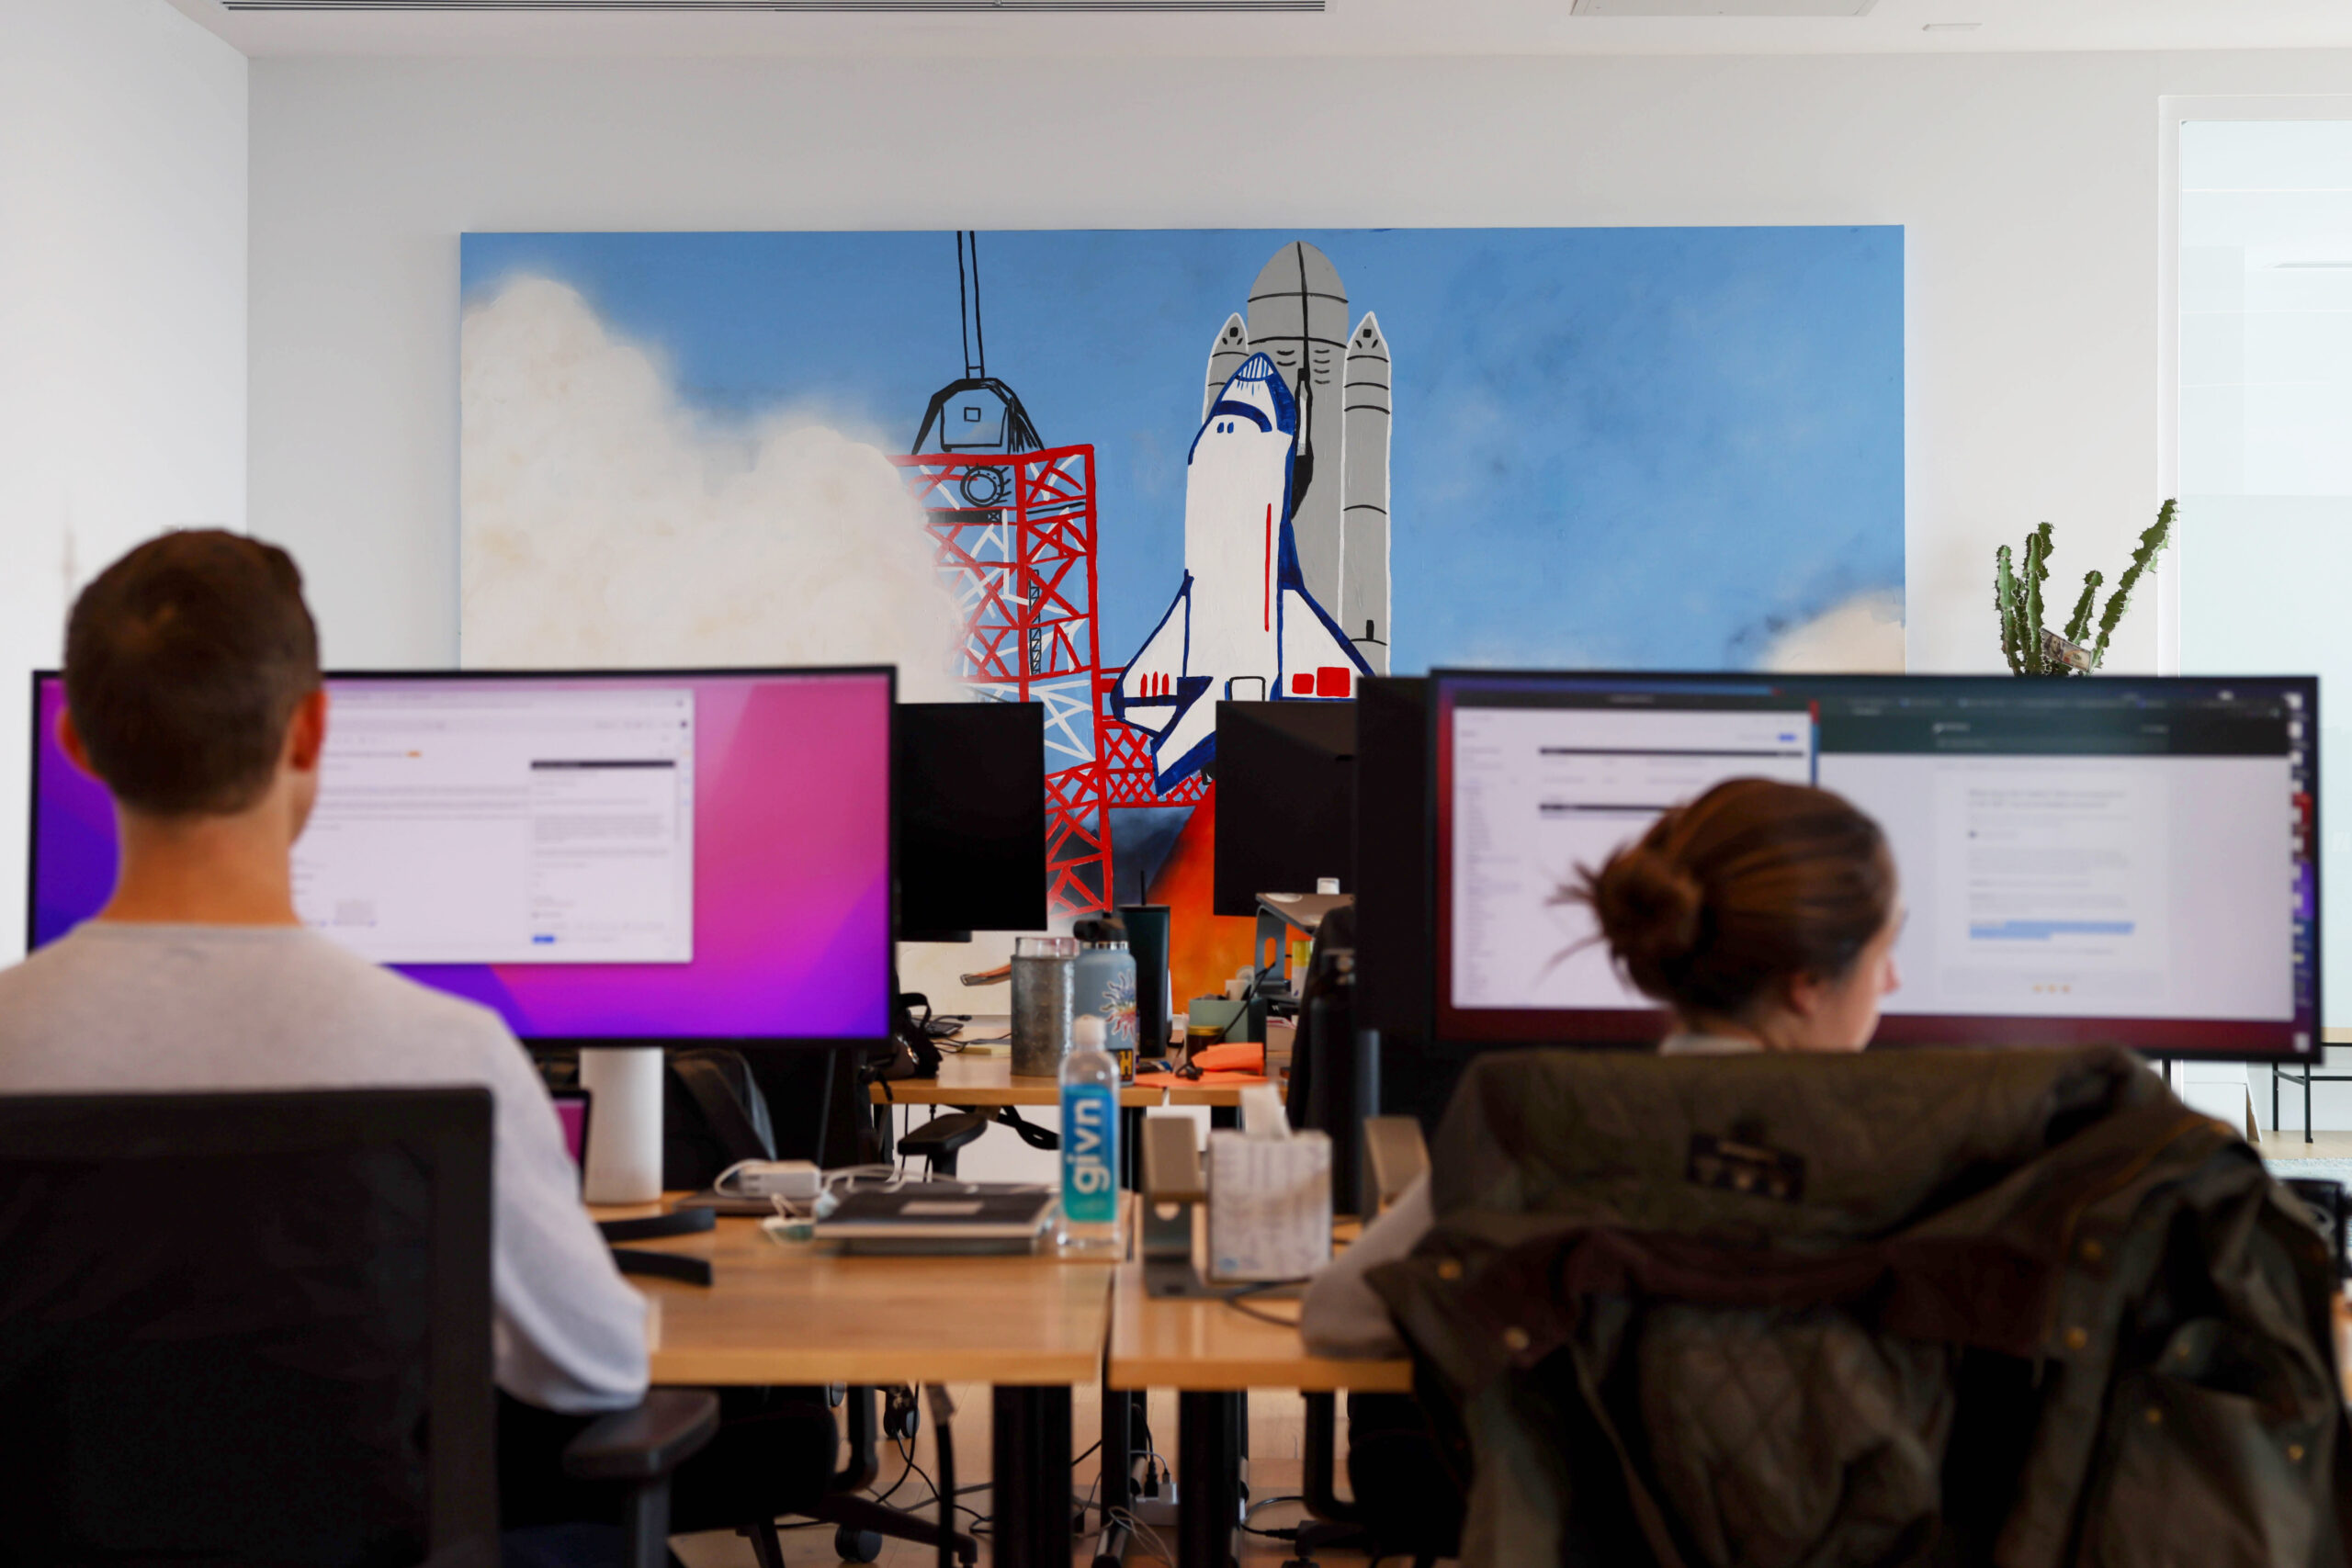 A photo of two people working at their computers in a startup office with a space shuttle painting in the background.